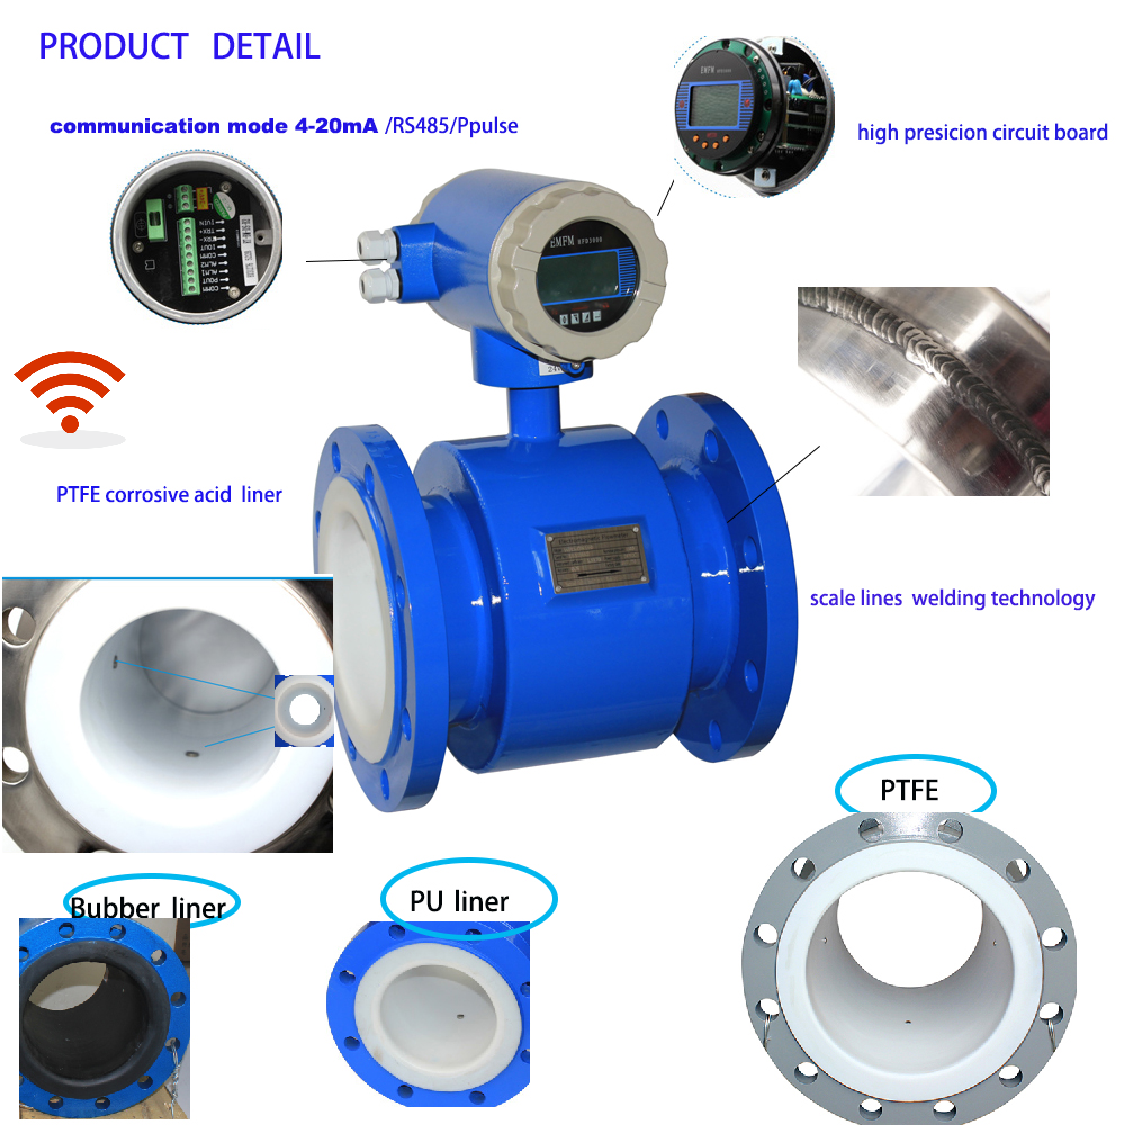 LOW-PRICED WITH A SPEED RANGE OF 0.3MS~15MS FOR WATER MEDIUM OEM OBM SERIES INTEGRATED ELECTROMAGNETIC FLOW METER